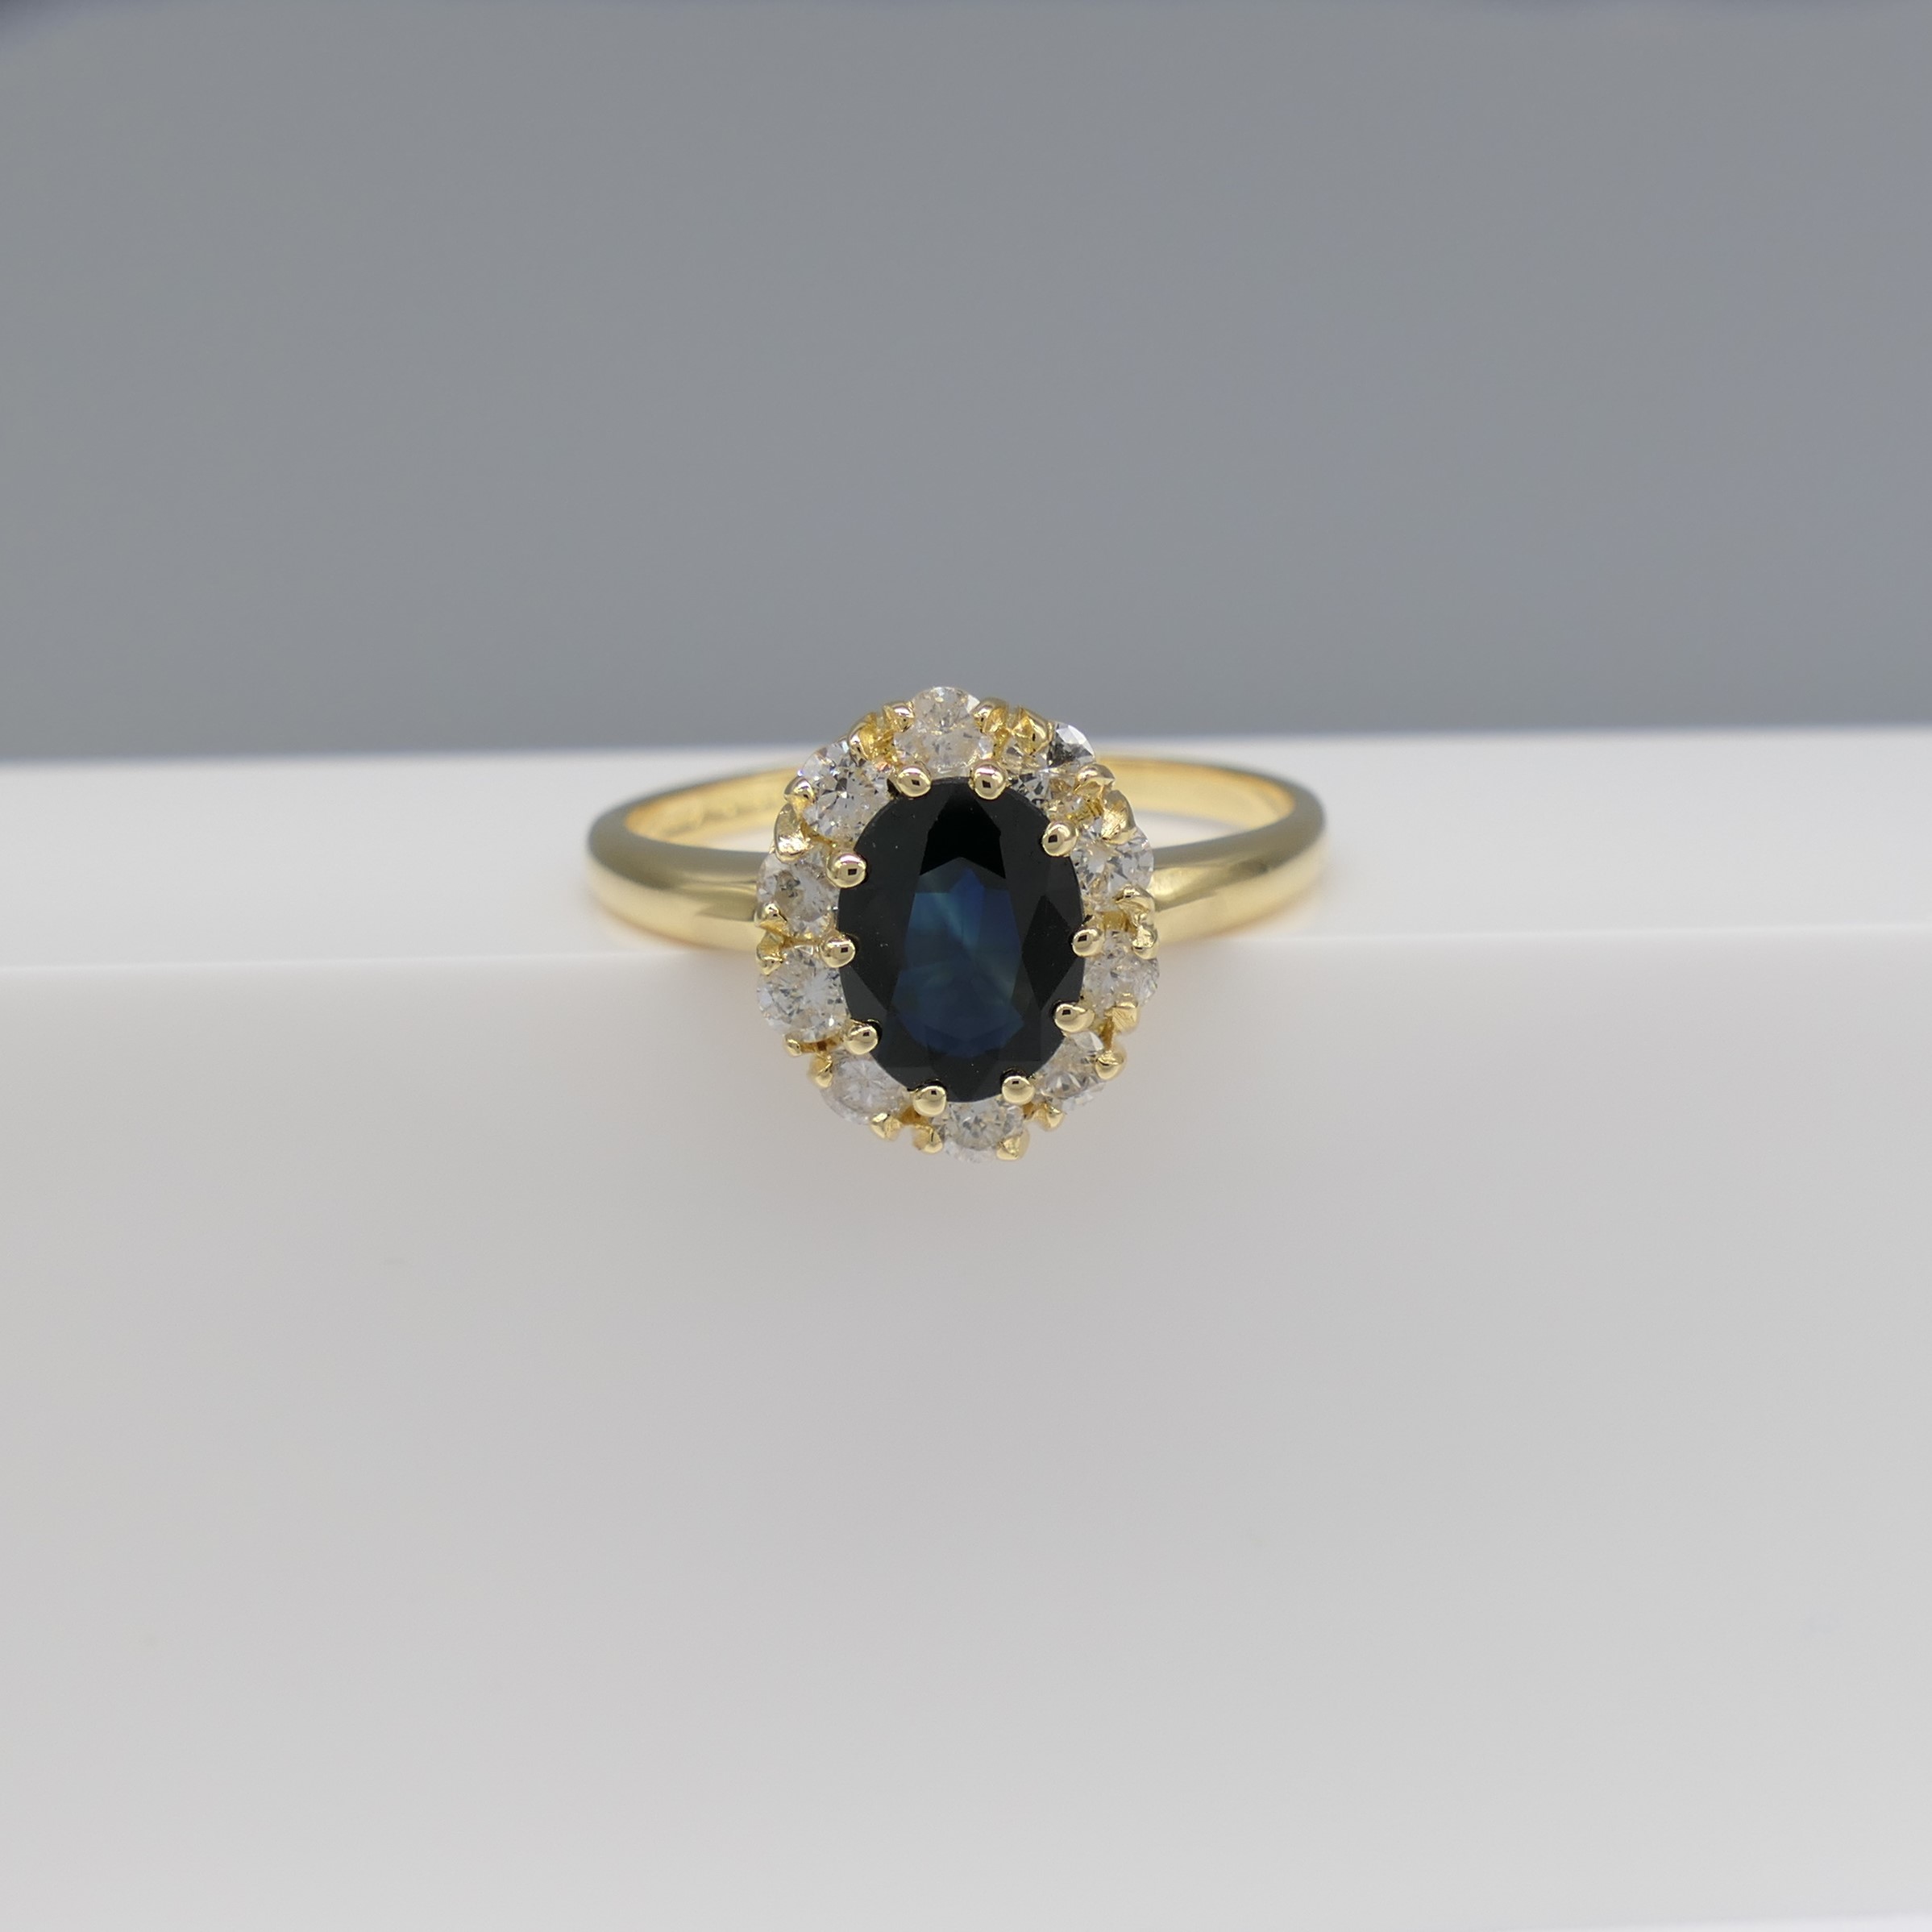 Oval-cut Sapphire and Round Brilliant-cut Diamond Cluster Ring In 18ct Yellow Gold - Image 2 of 6